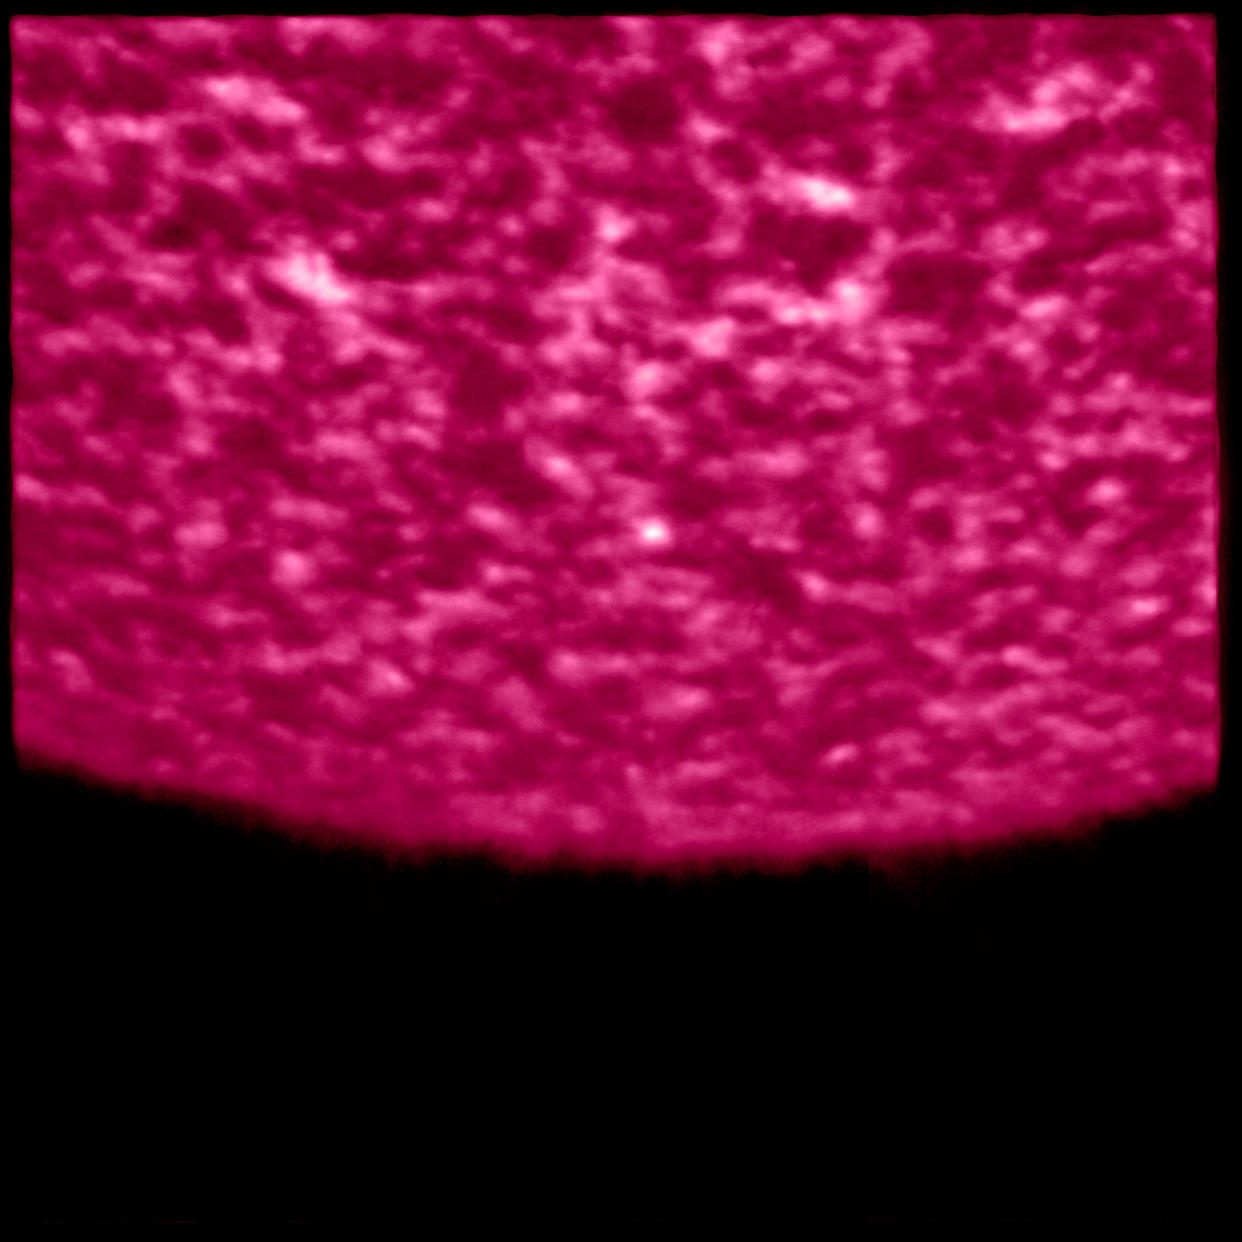 Image captured by the Solar Orbiter when it came within 47 million miles of the Sun's surface. (BEIS via PA)